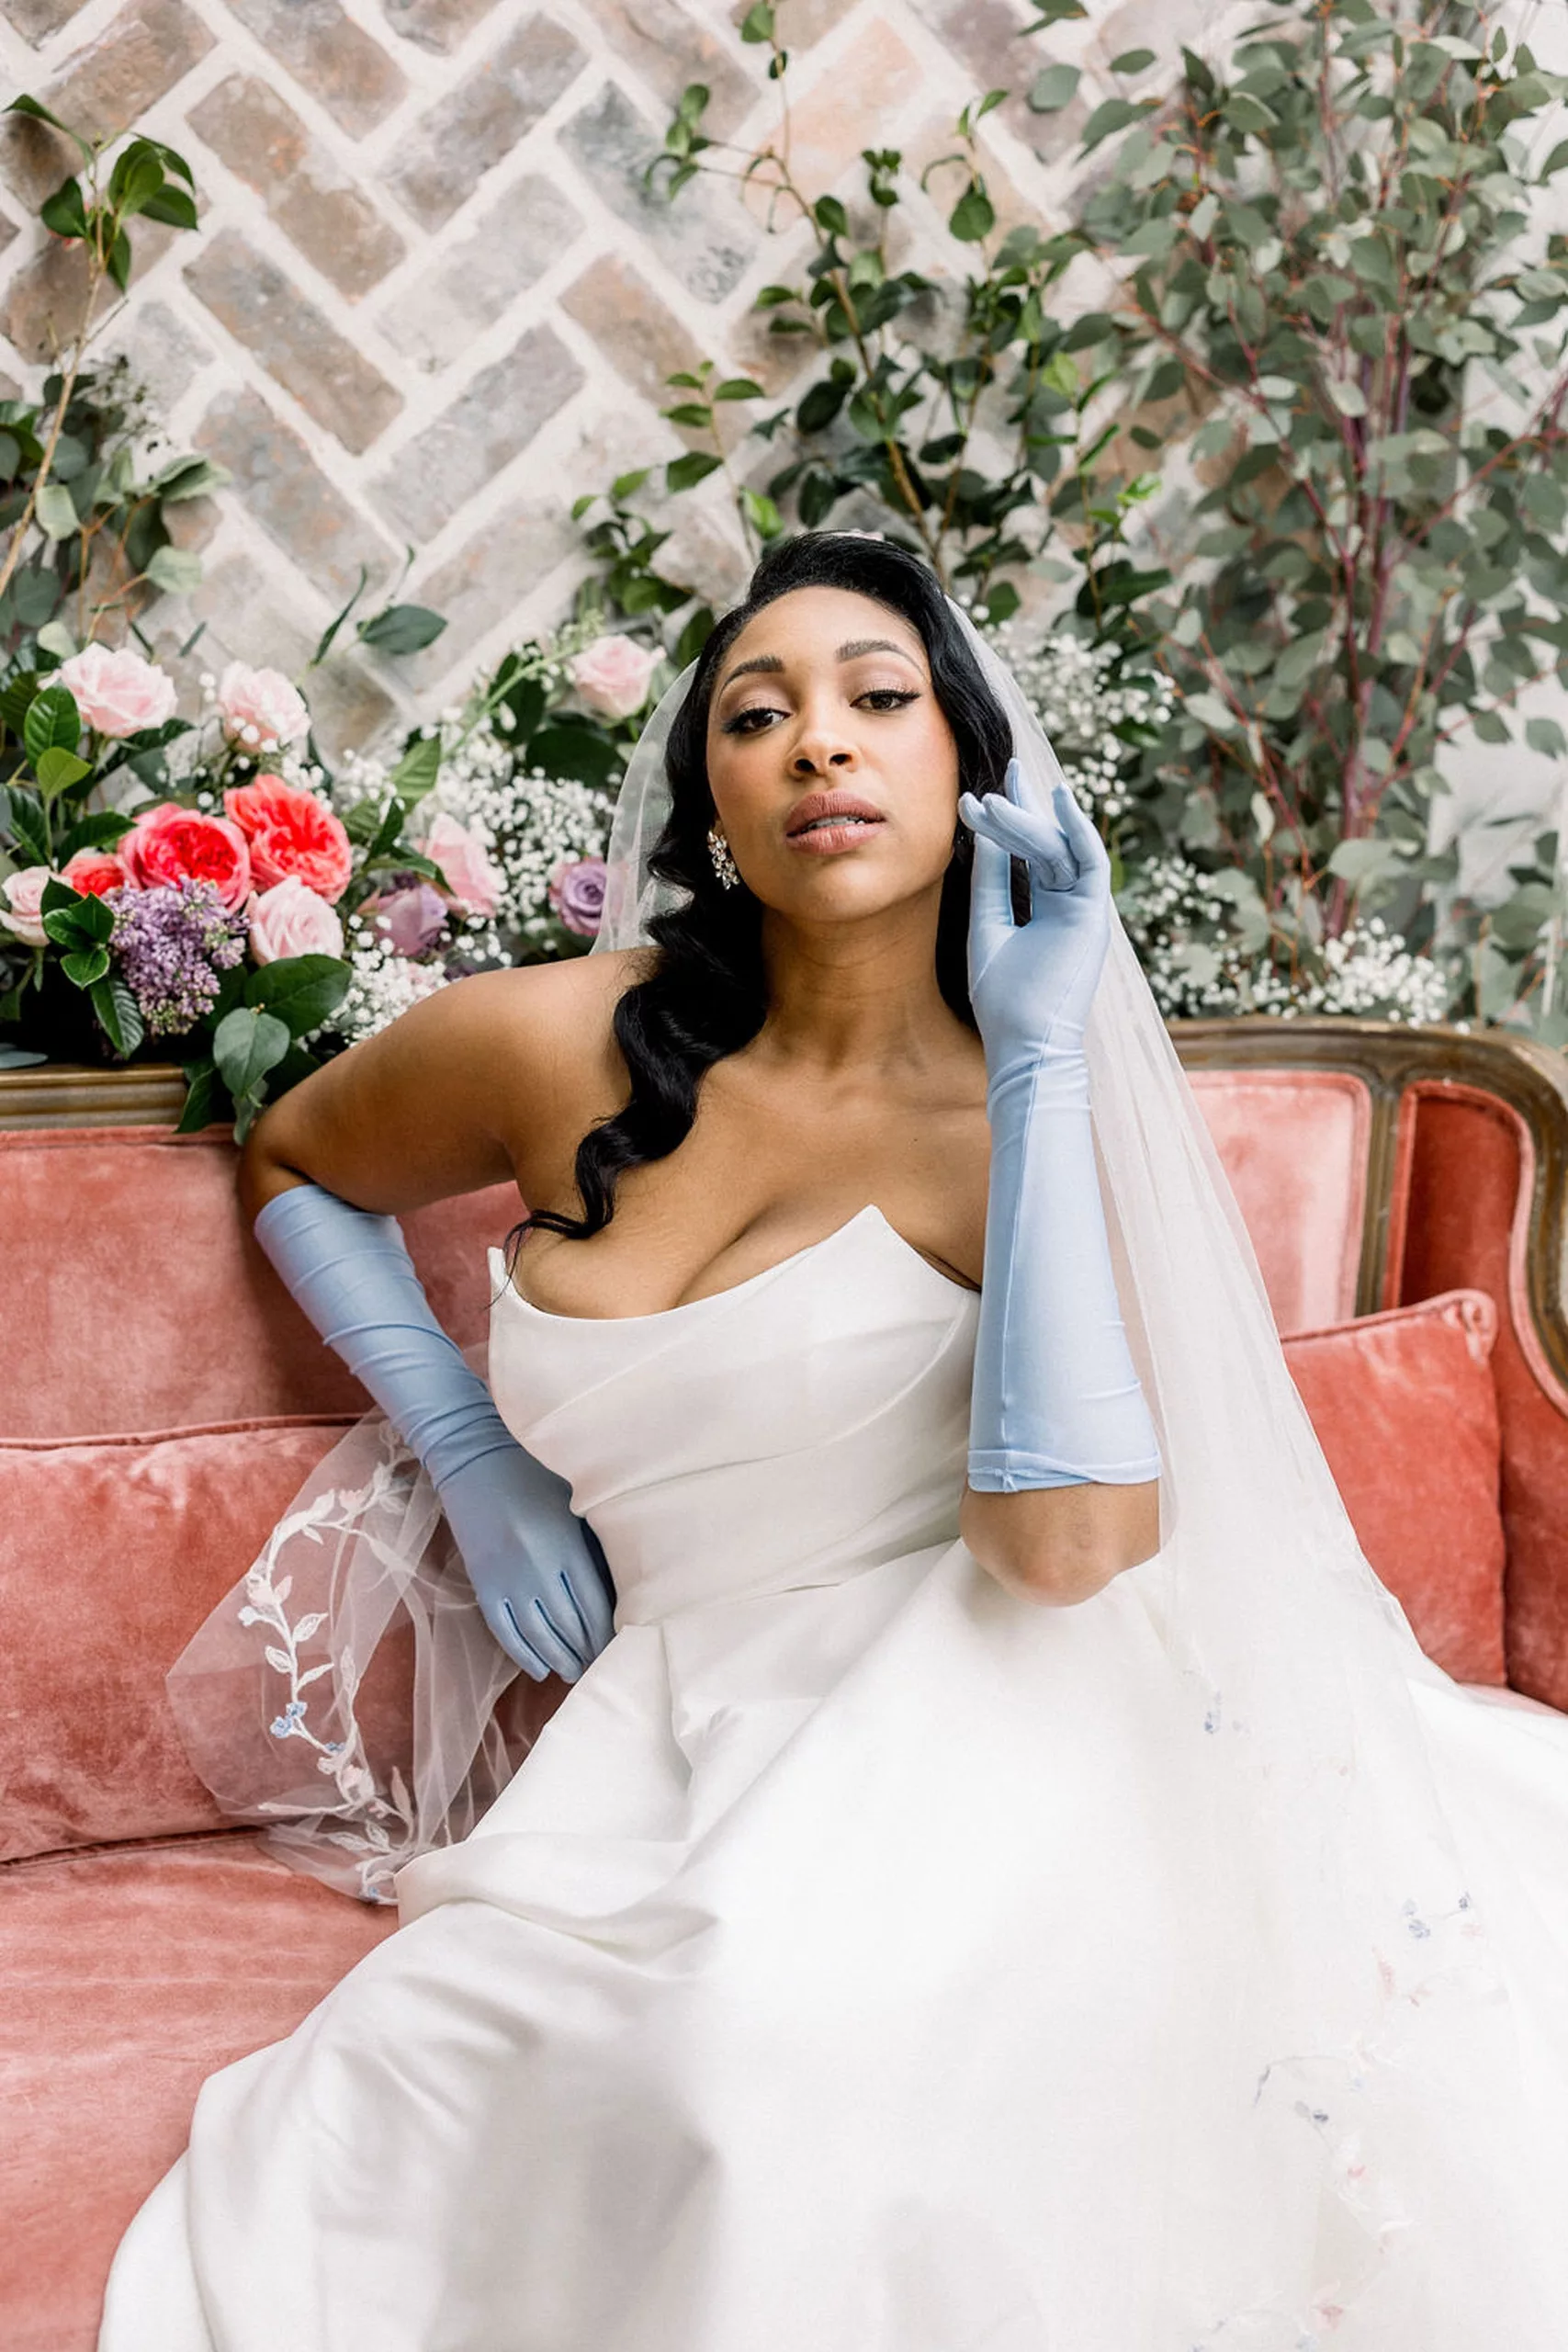 A bride raises her hand in a blue glove as she sits in a pink couch